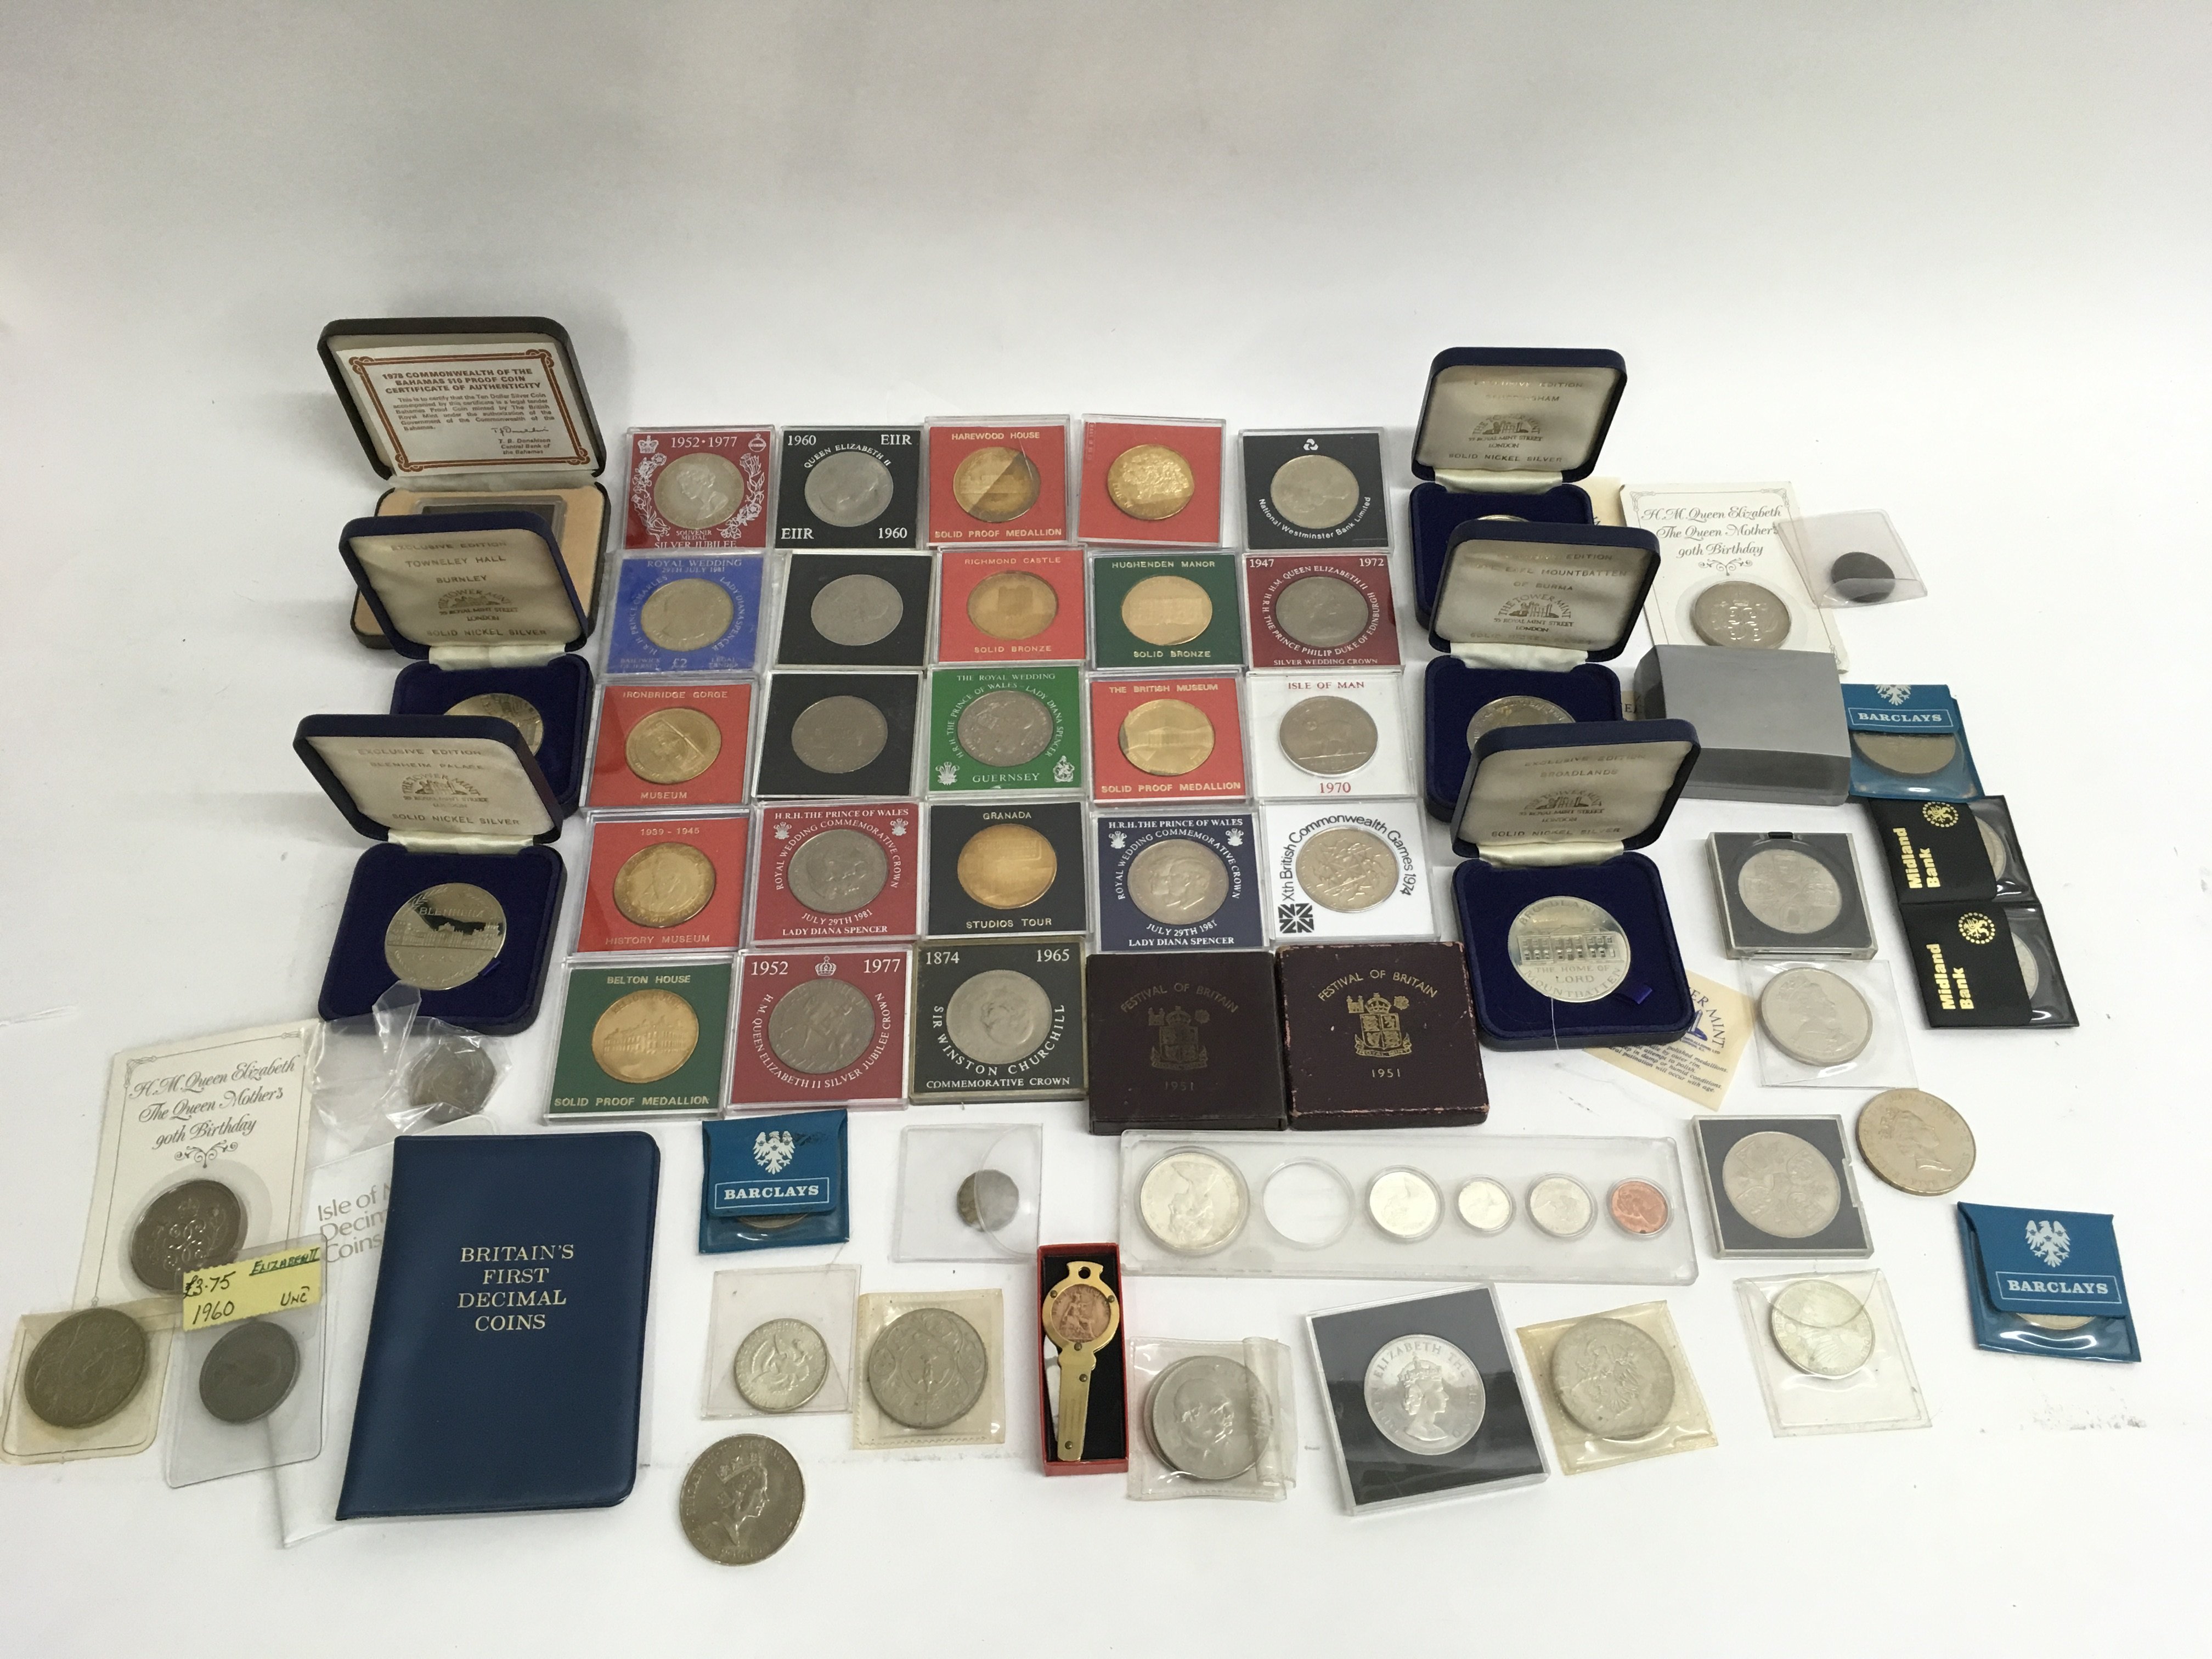 A collection of proof and royal commemorative coin